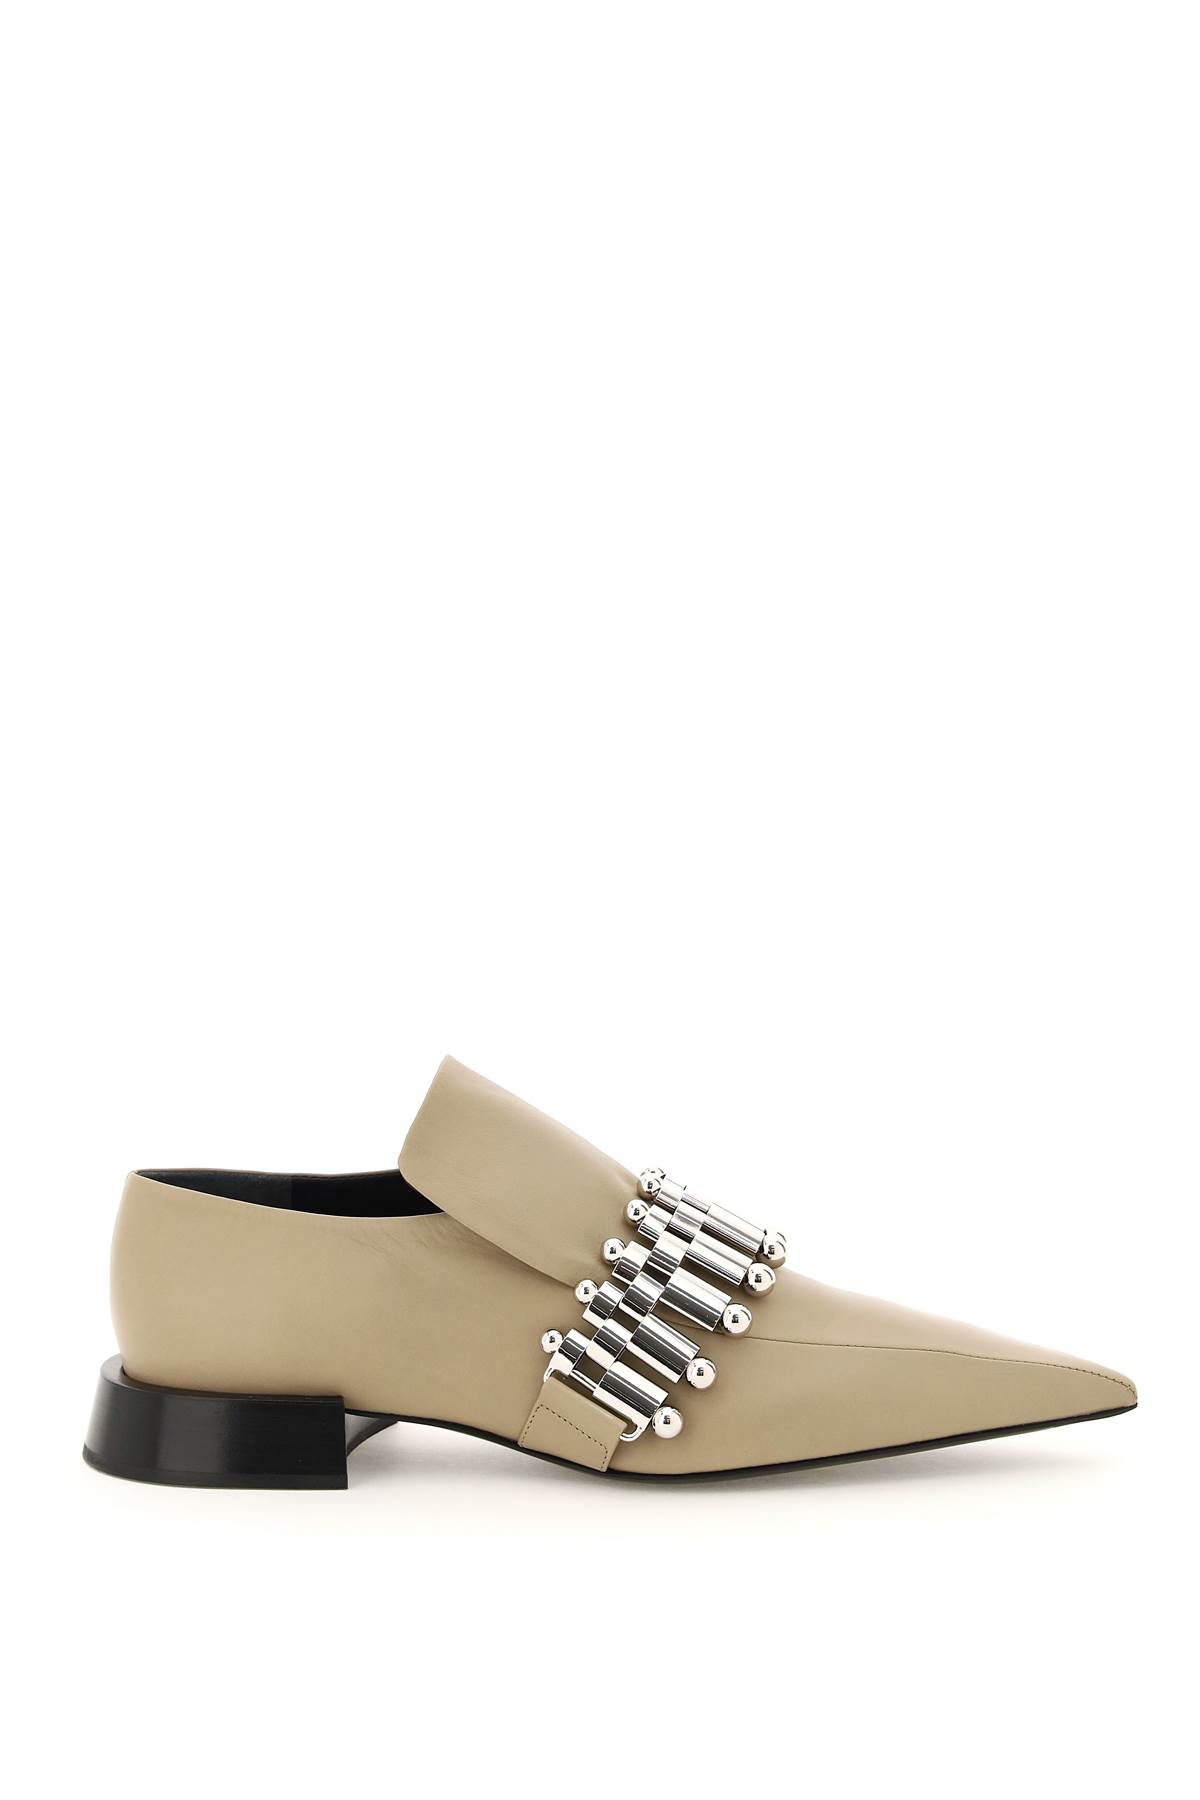 Jil Sander Leather Loafers With Metal Detail